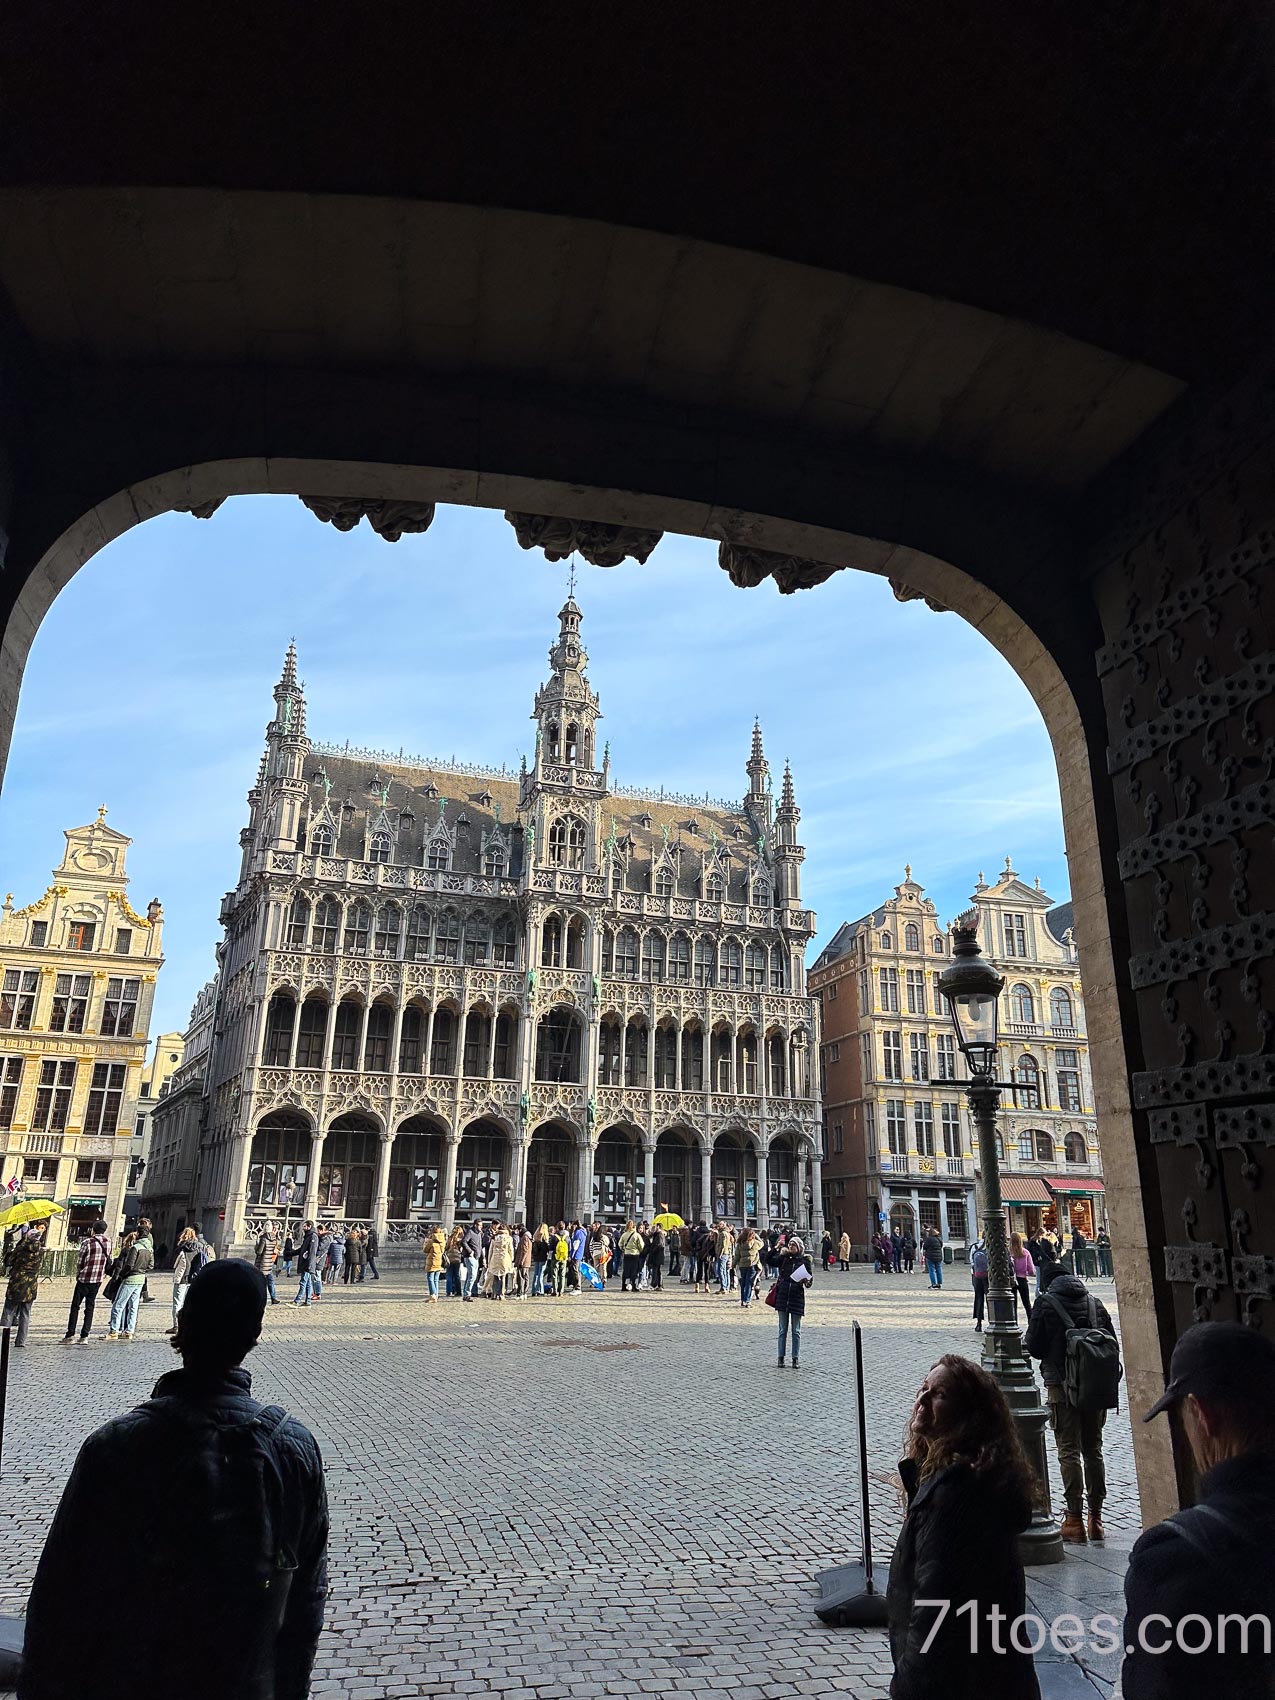 One Day in Brussels, Belgium